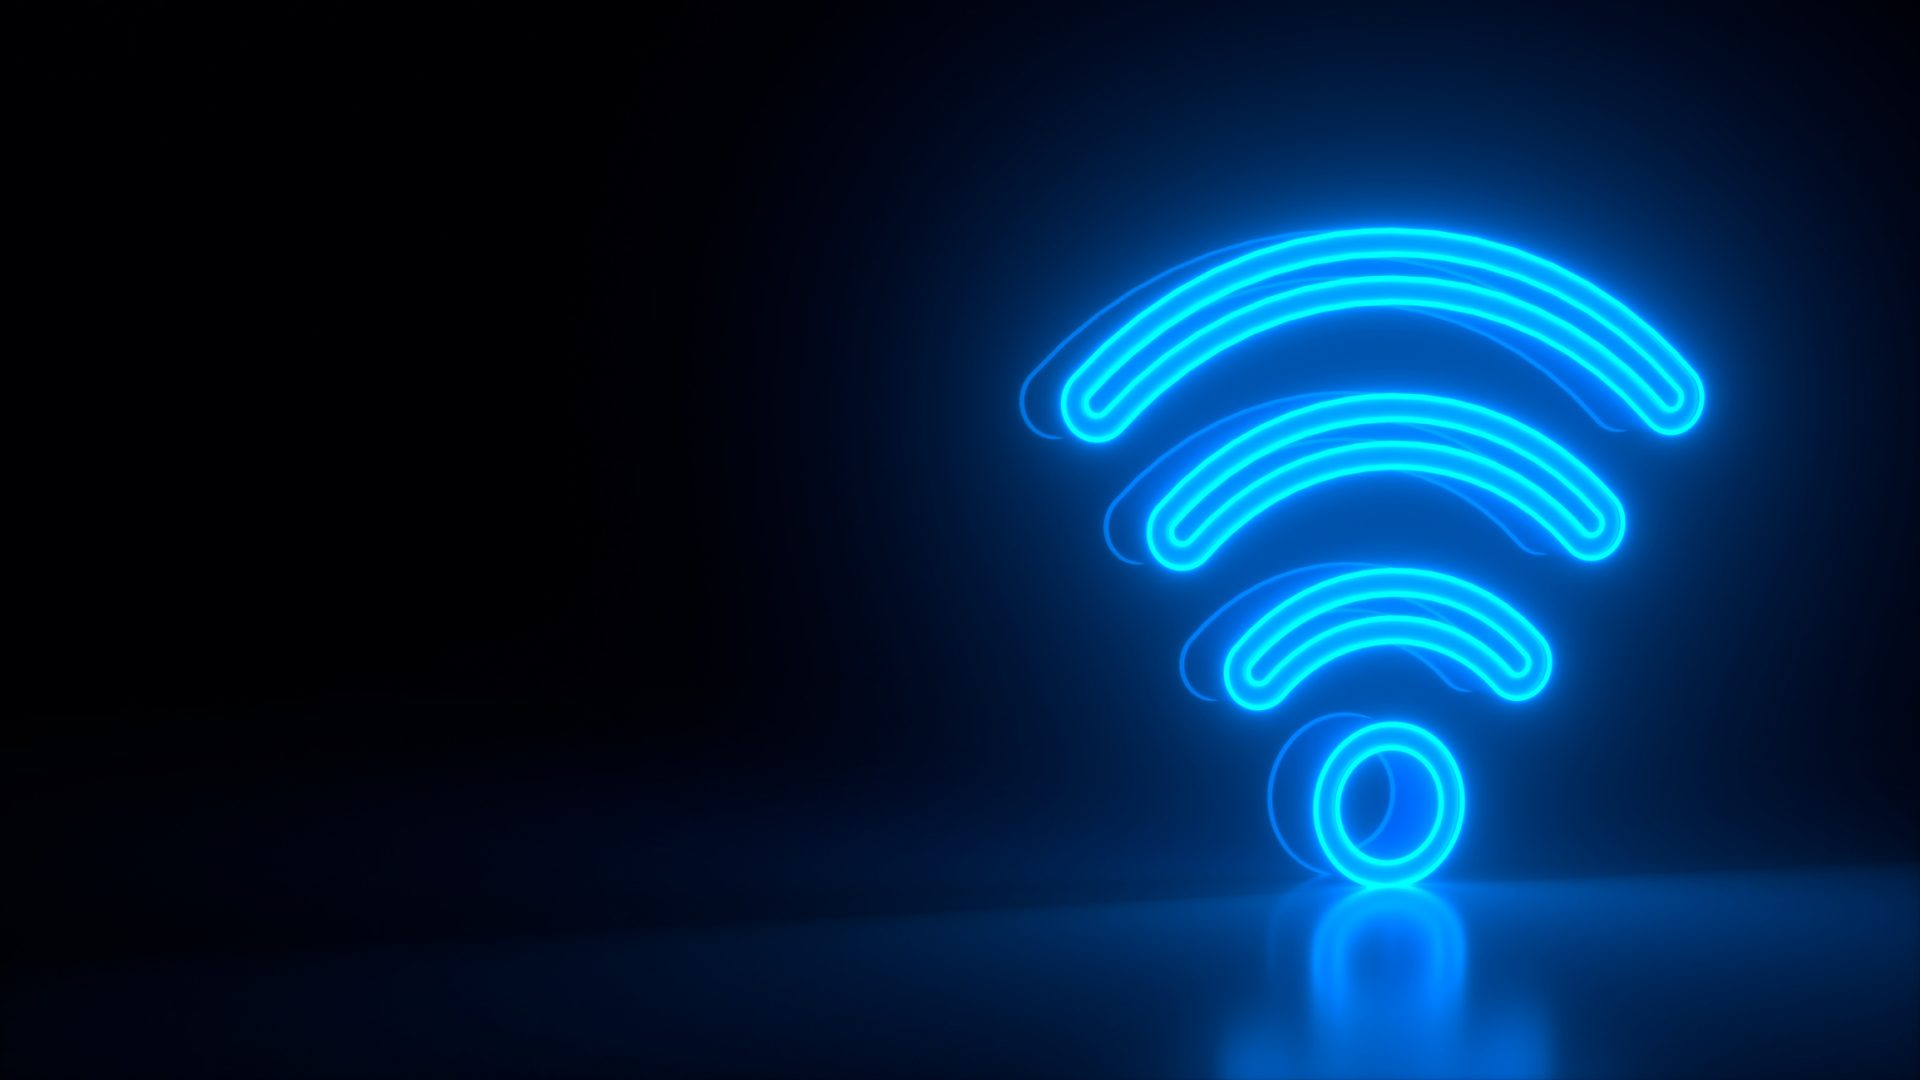 Glowing blue wifi signal on a black background